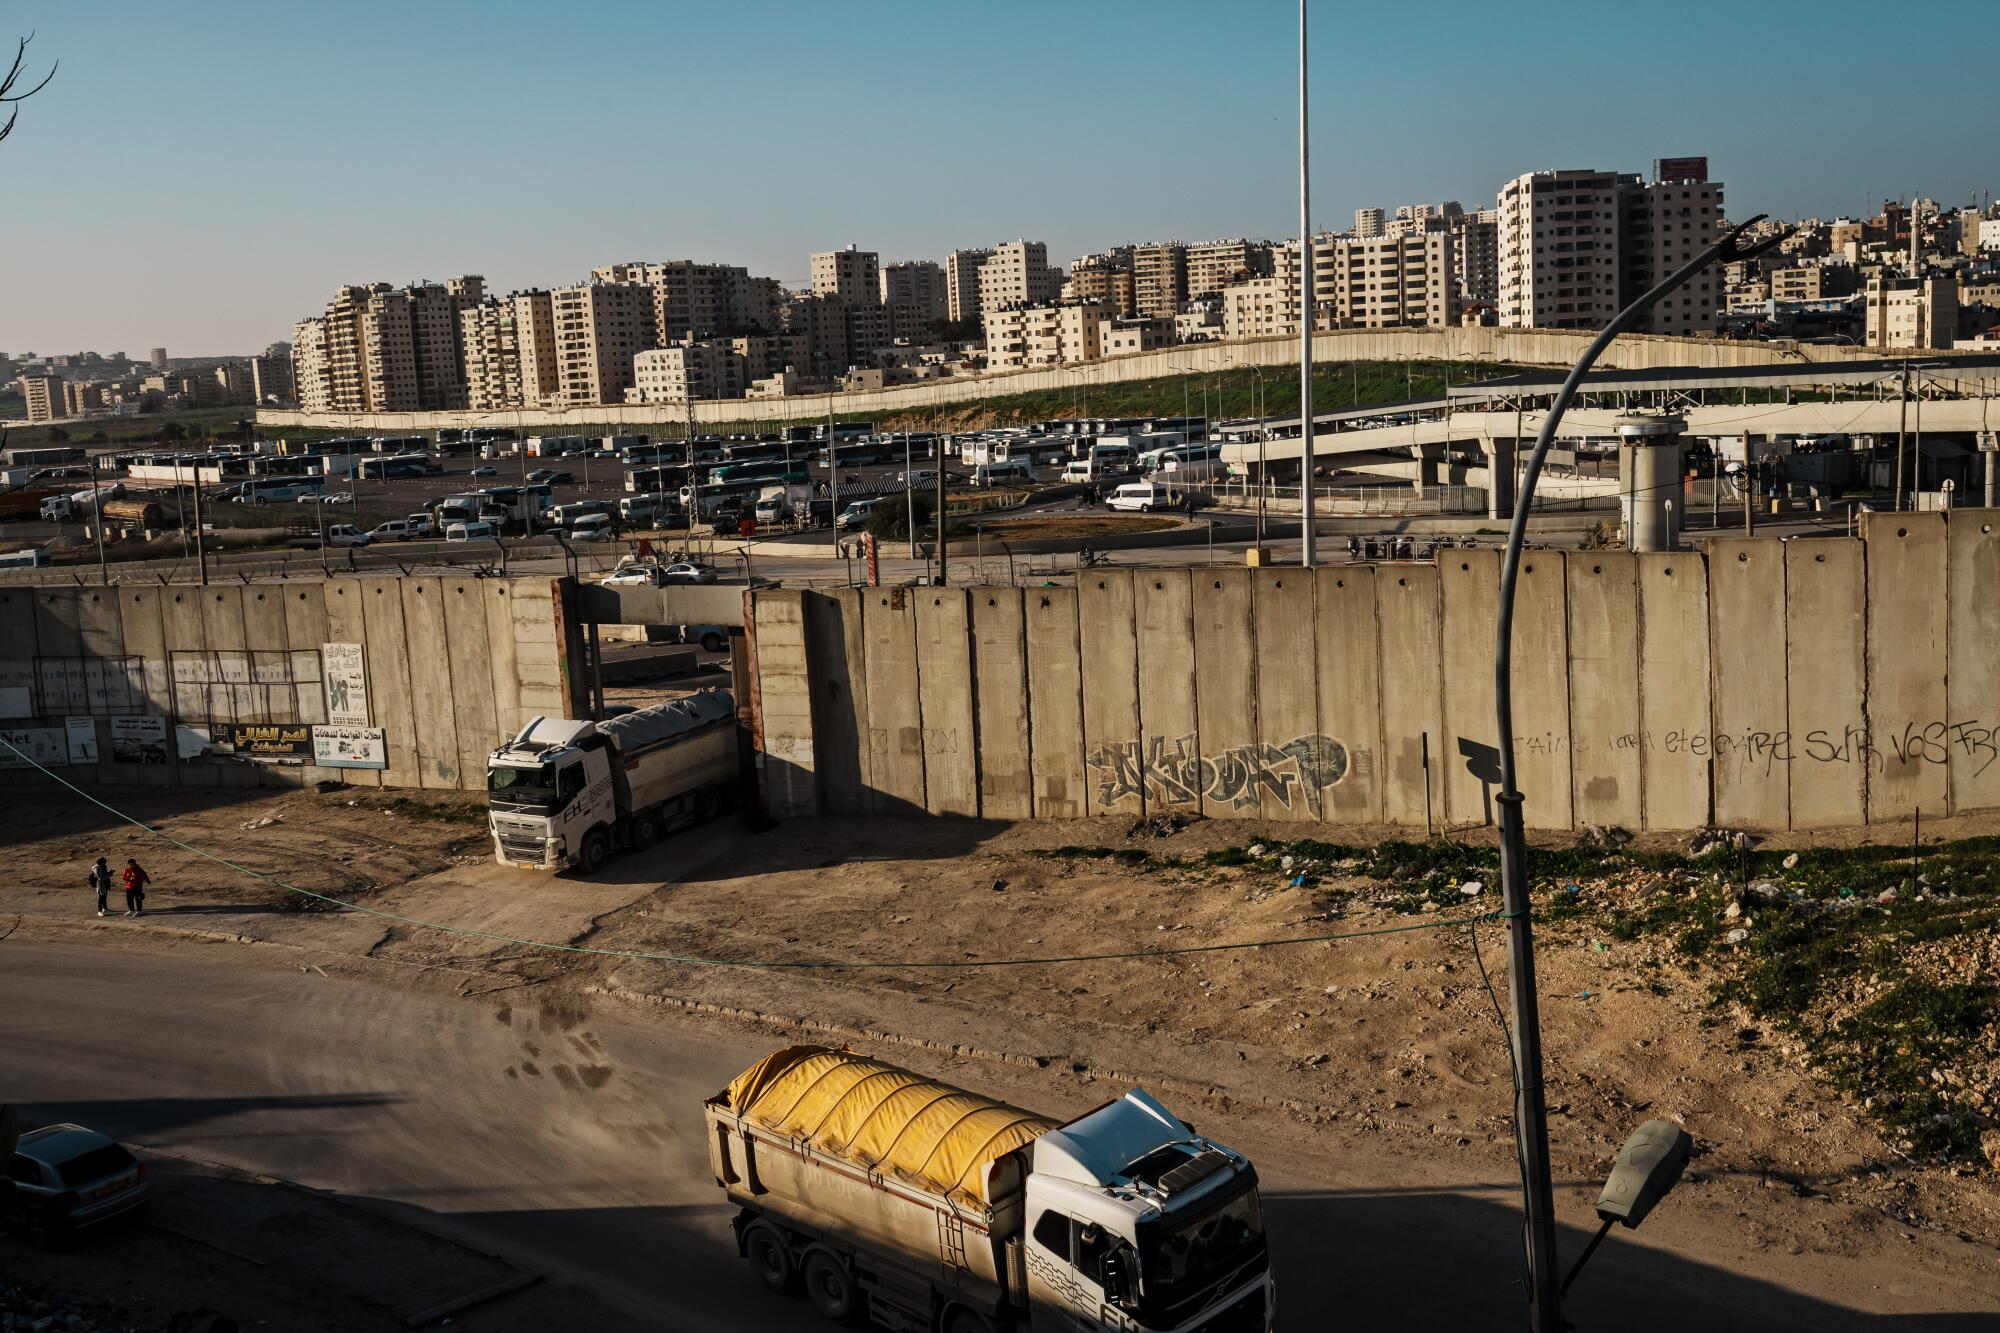 Commercial trucks travel during rush hour on Highway 60 near the Qalandiya checkpoint.